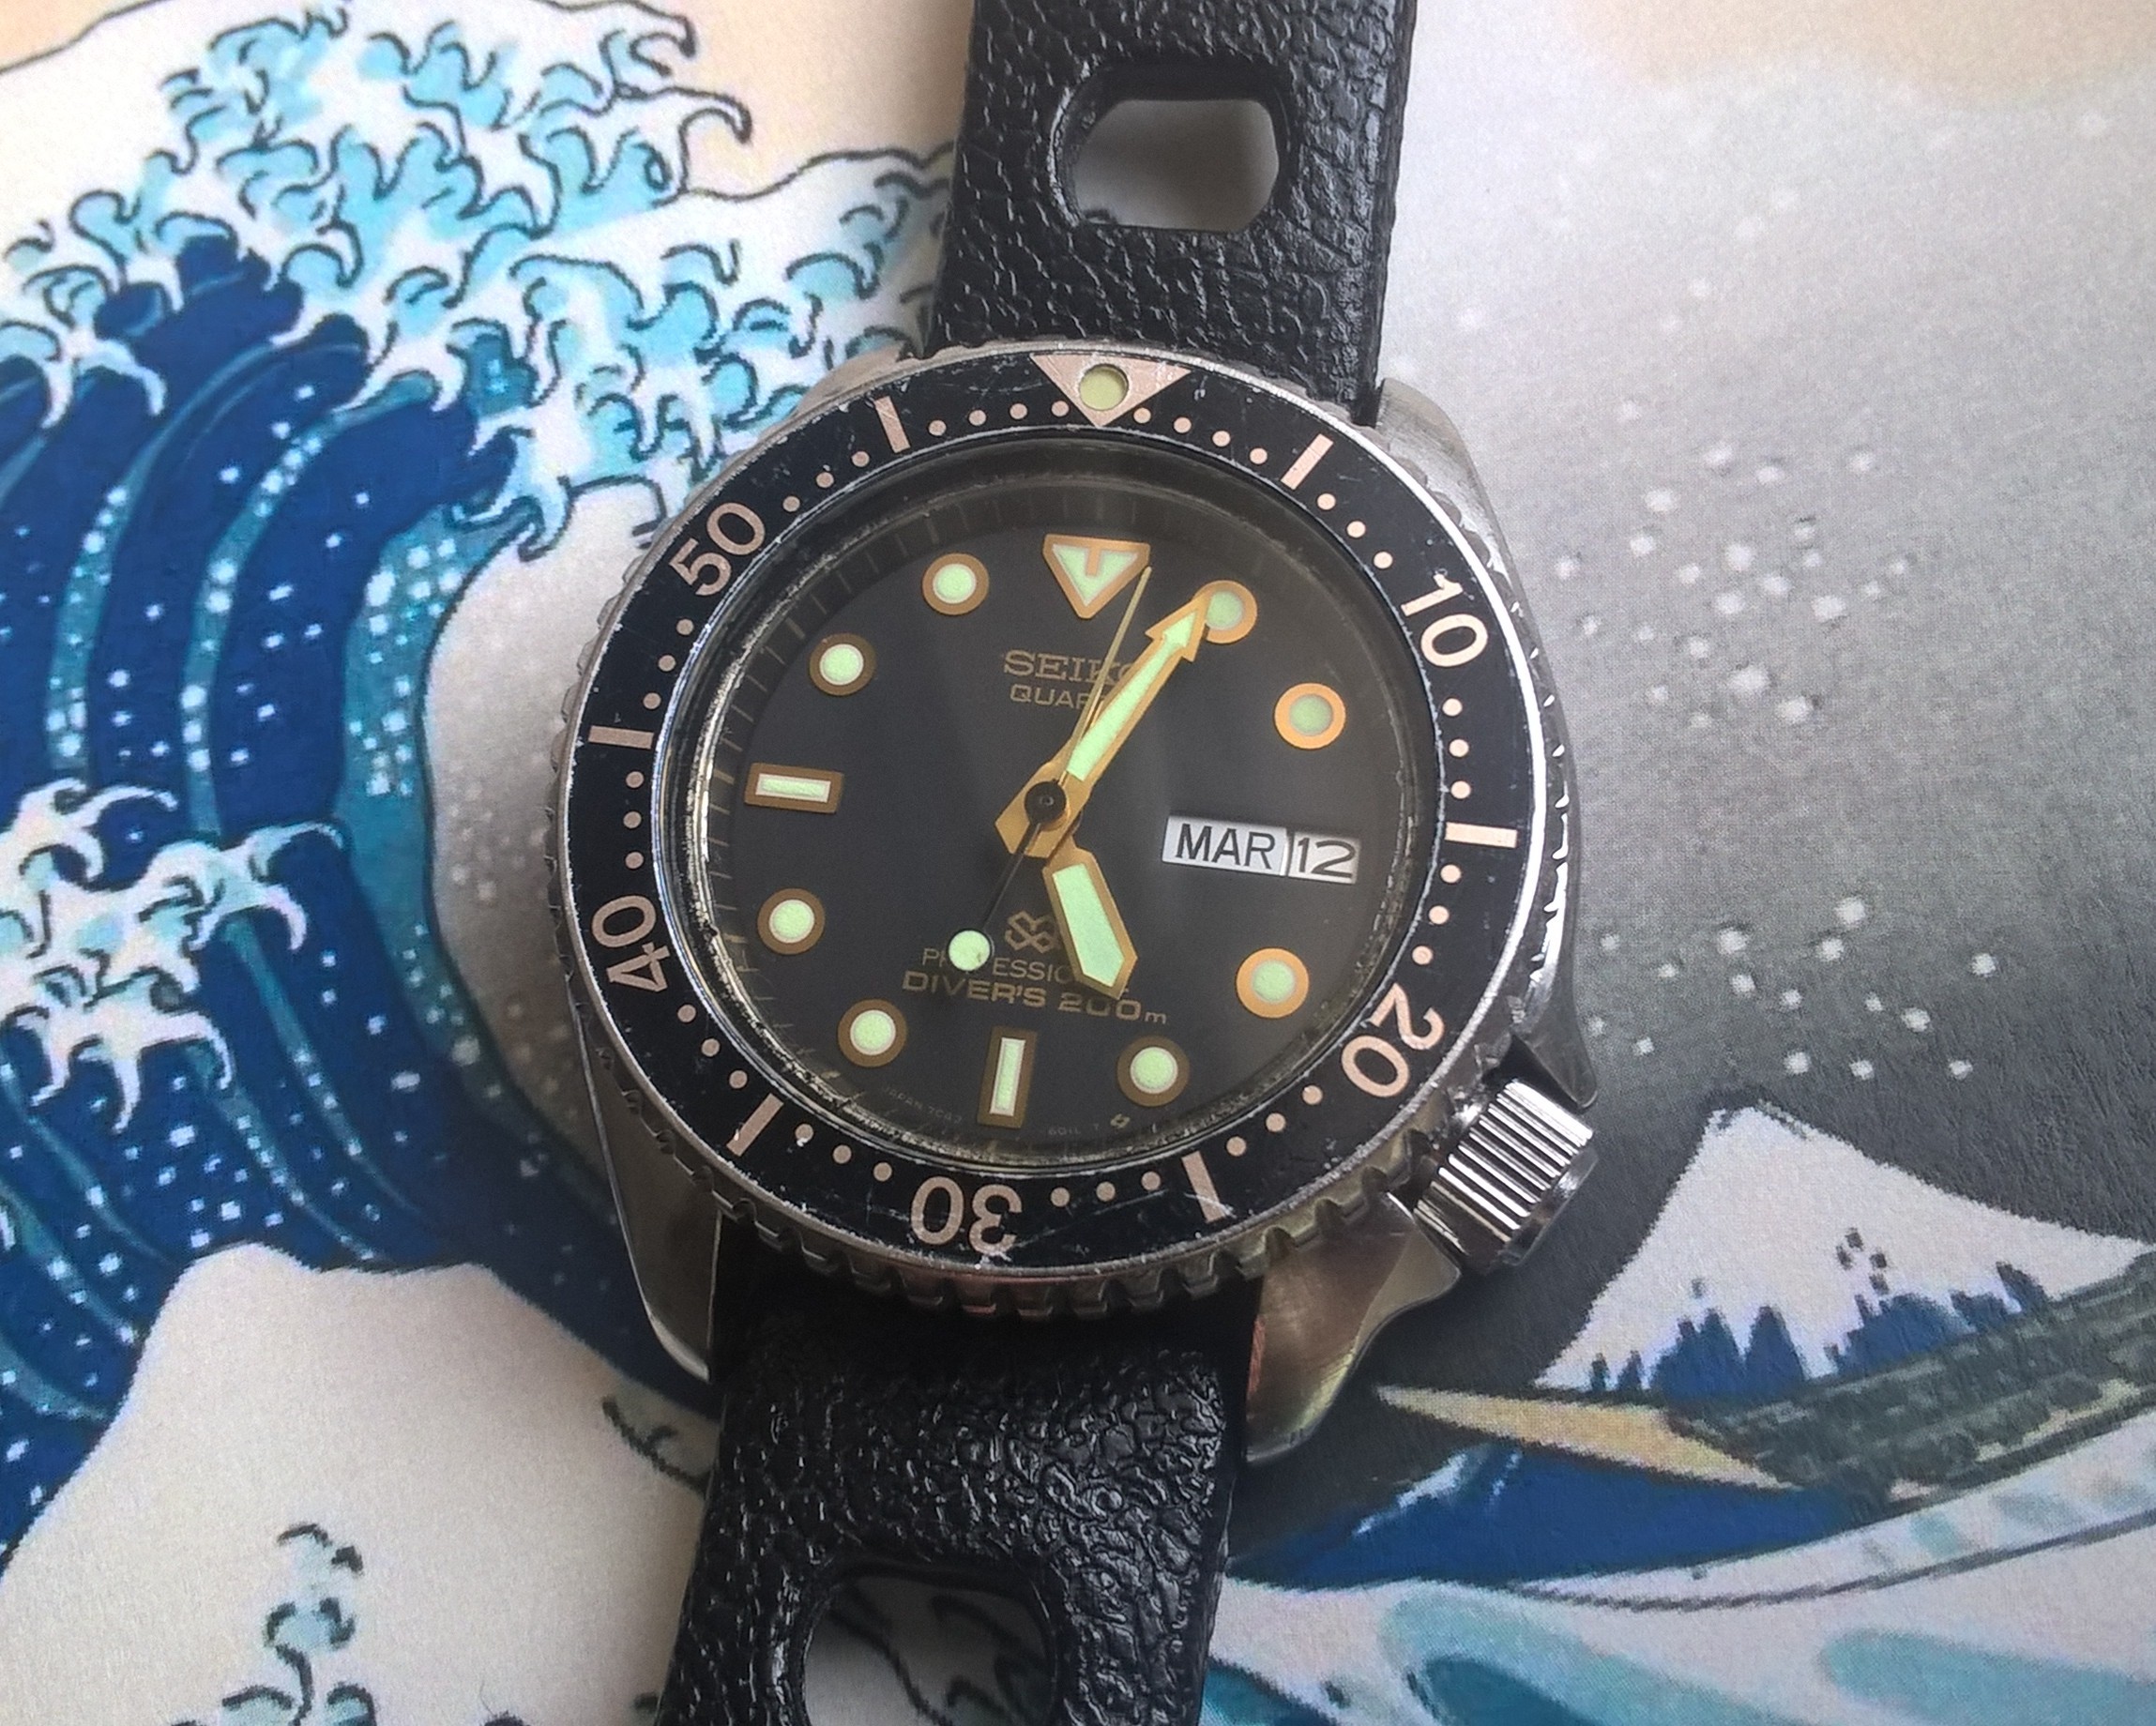 The Seiko mid size diver evolution from 6458 to 7C43 | Page 2 | The Watch  Site